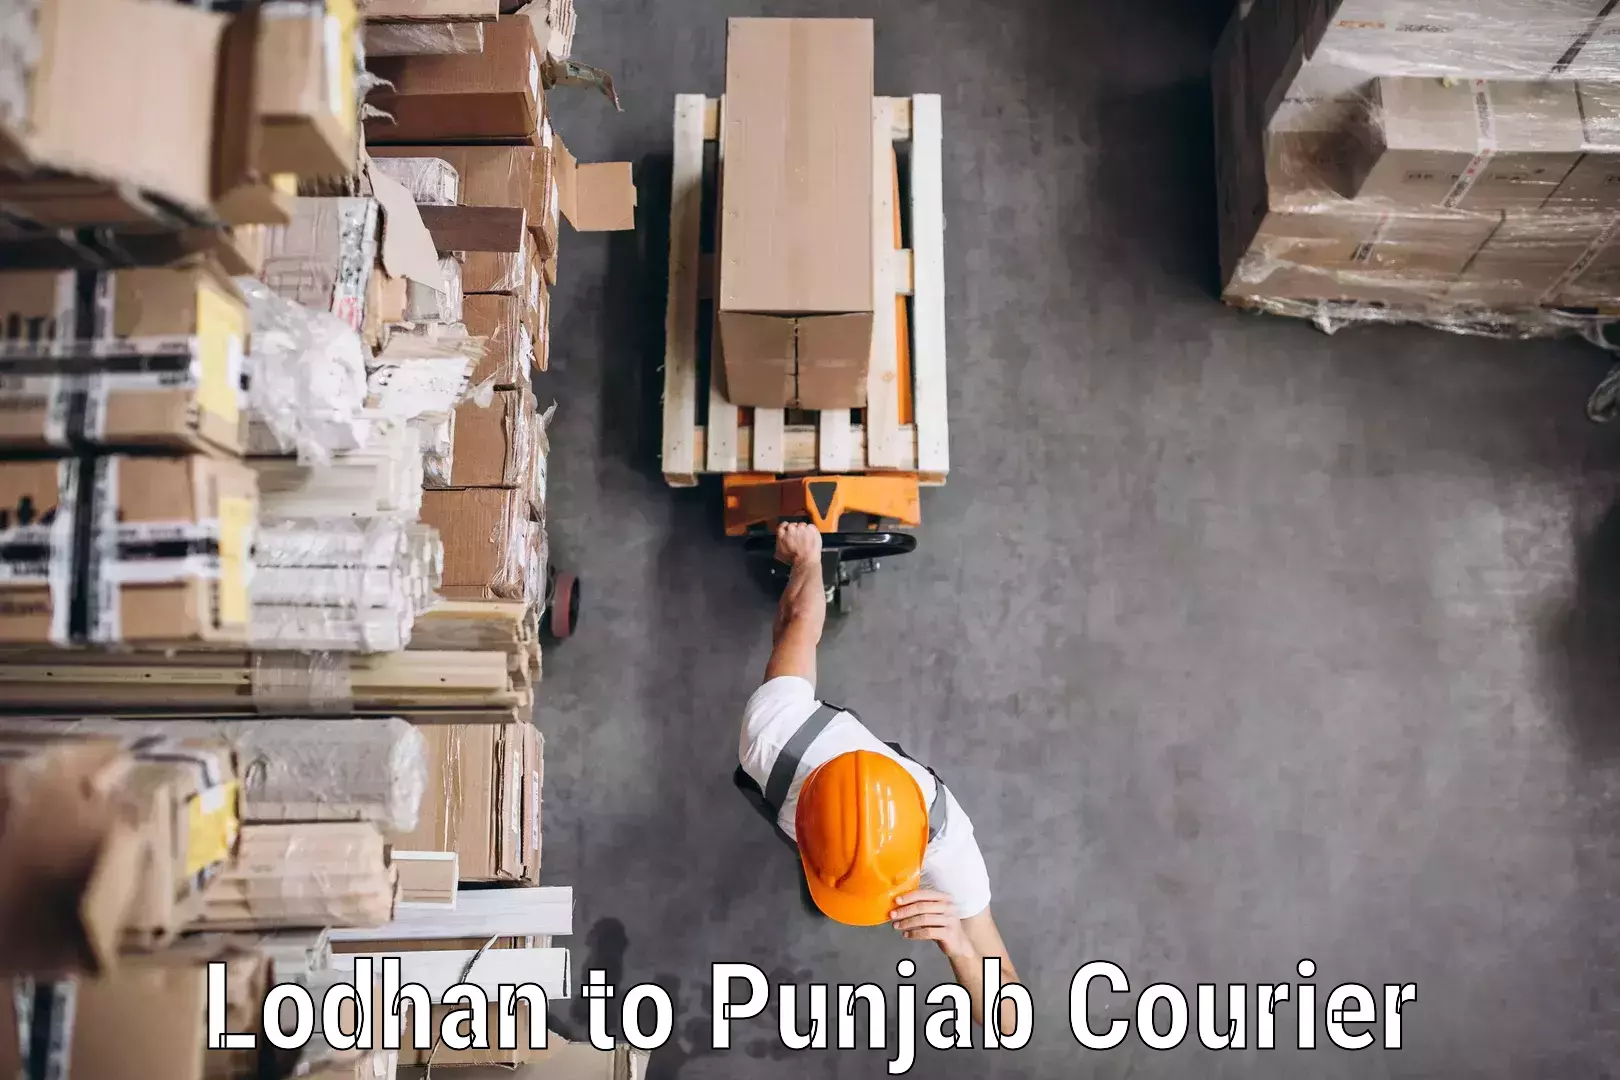 Quality courier services Lodhan to Punjab